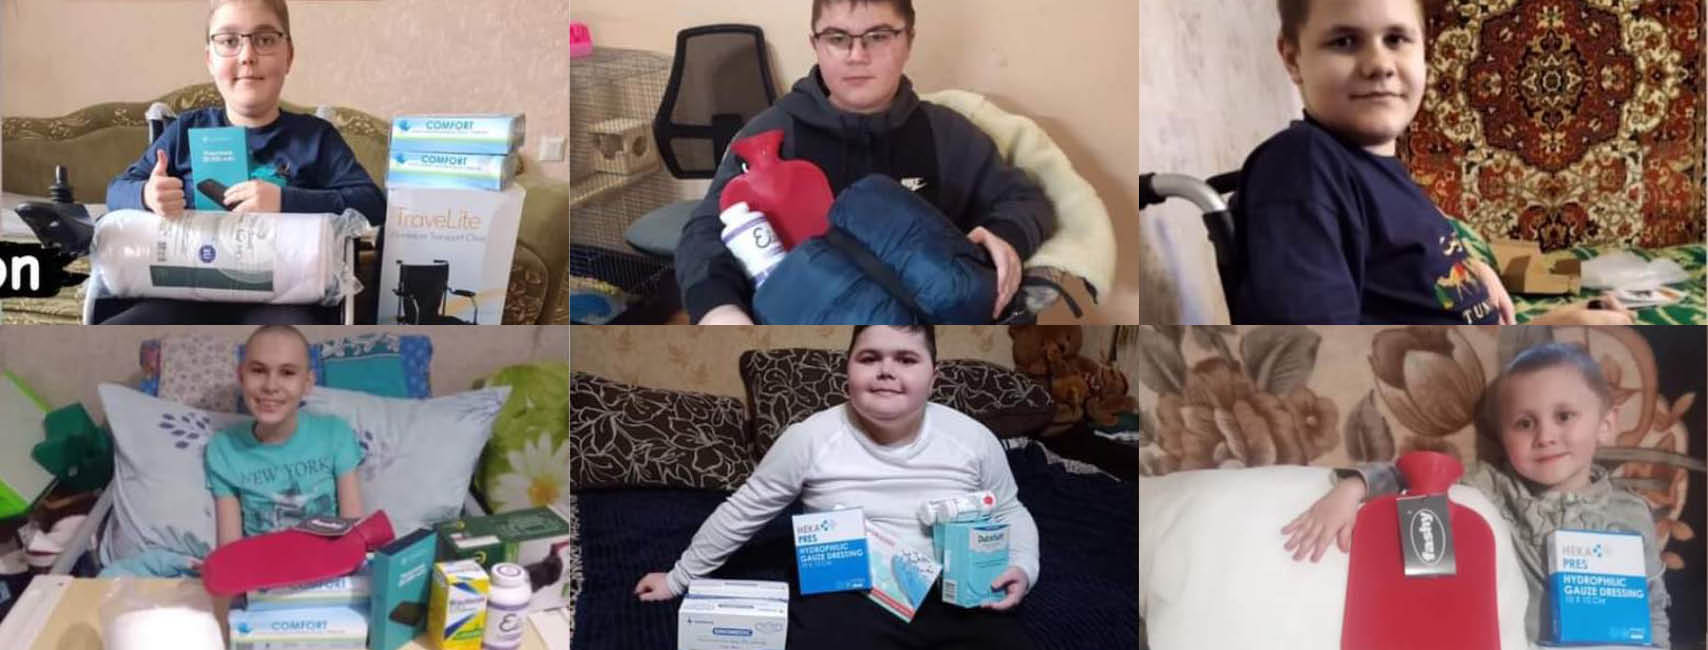 Six boys with Duchenne are posing with the materials they have received: wheelchairs, pillows, supplements, and other humanitarian aid.